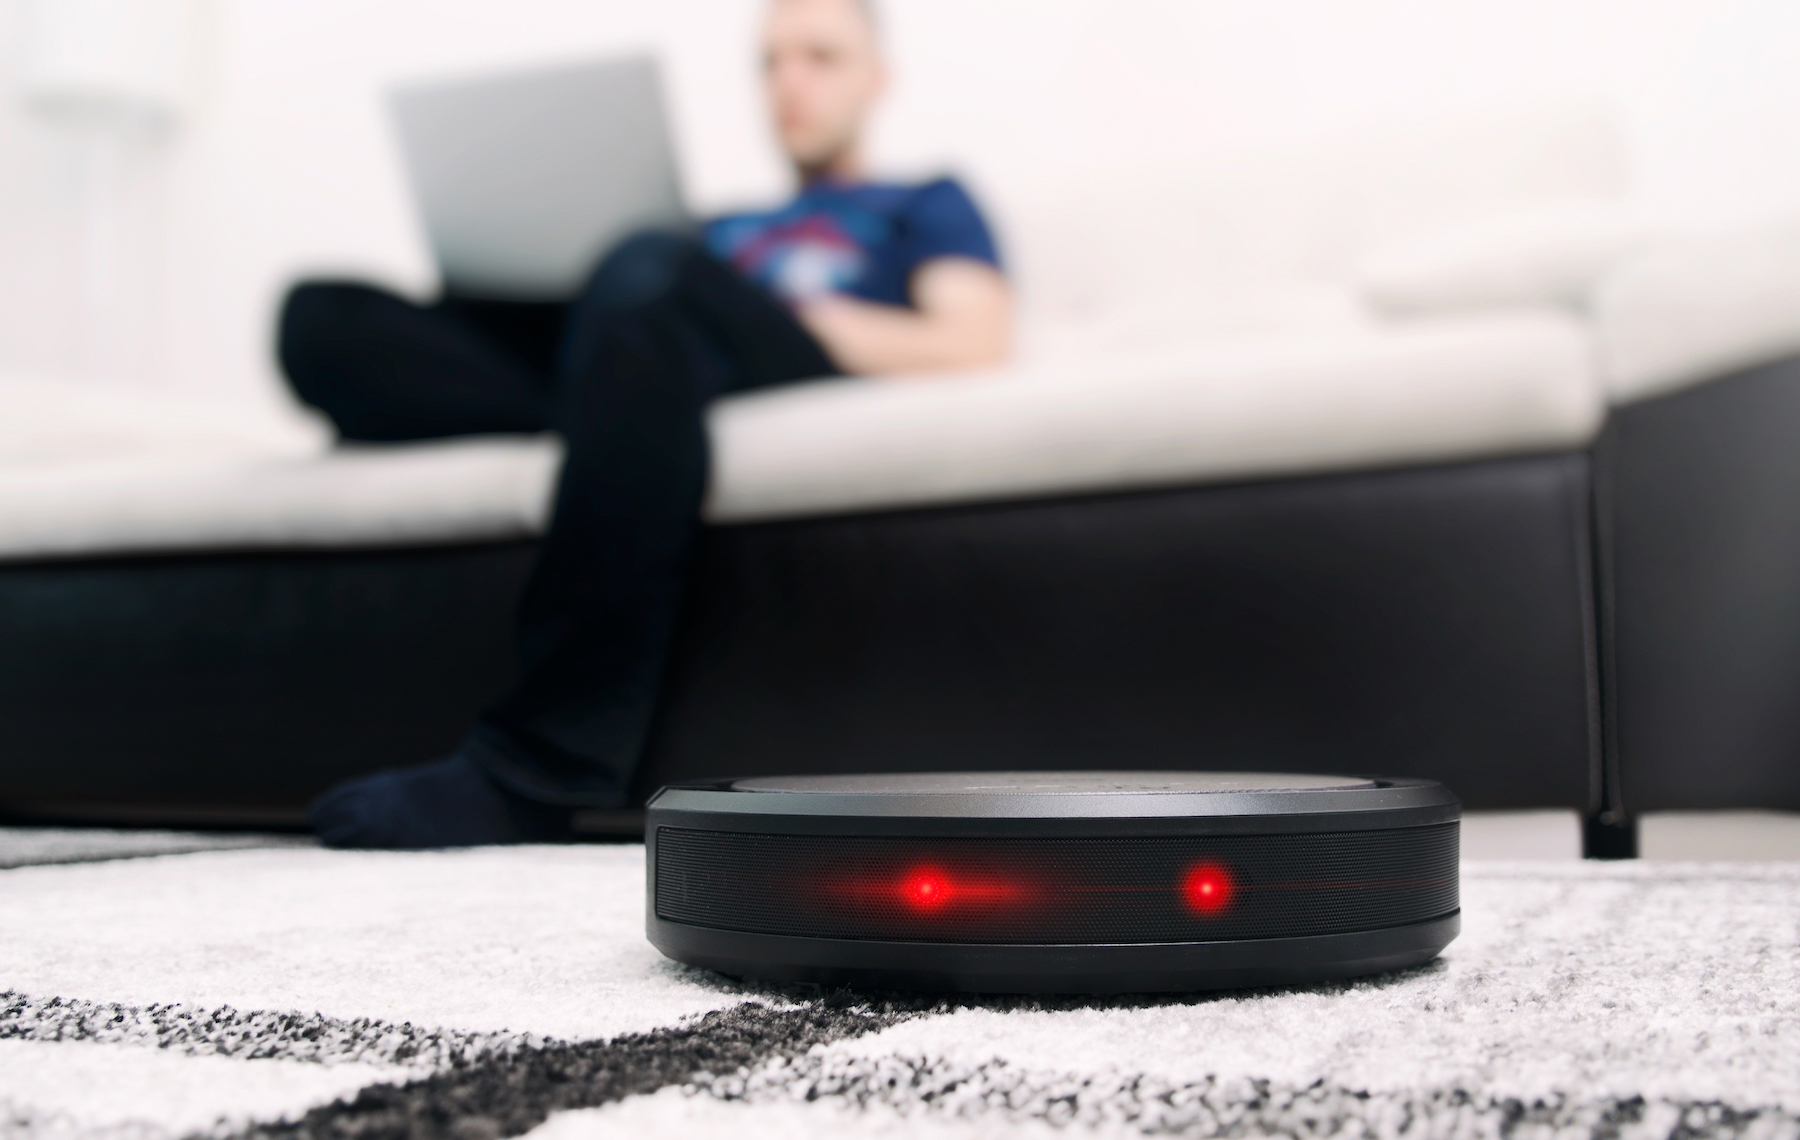 Robotic vacuum on carpet with person in background